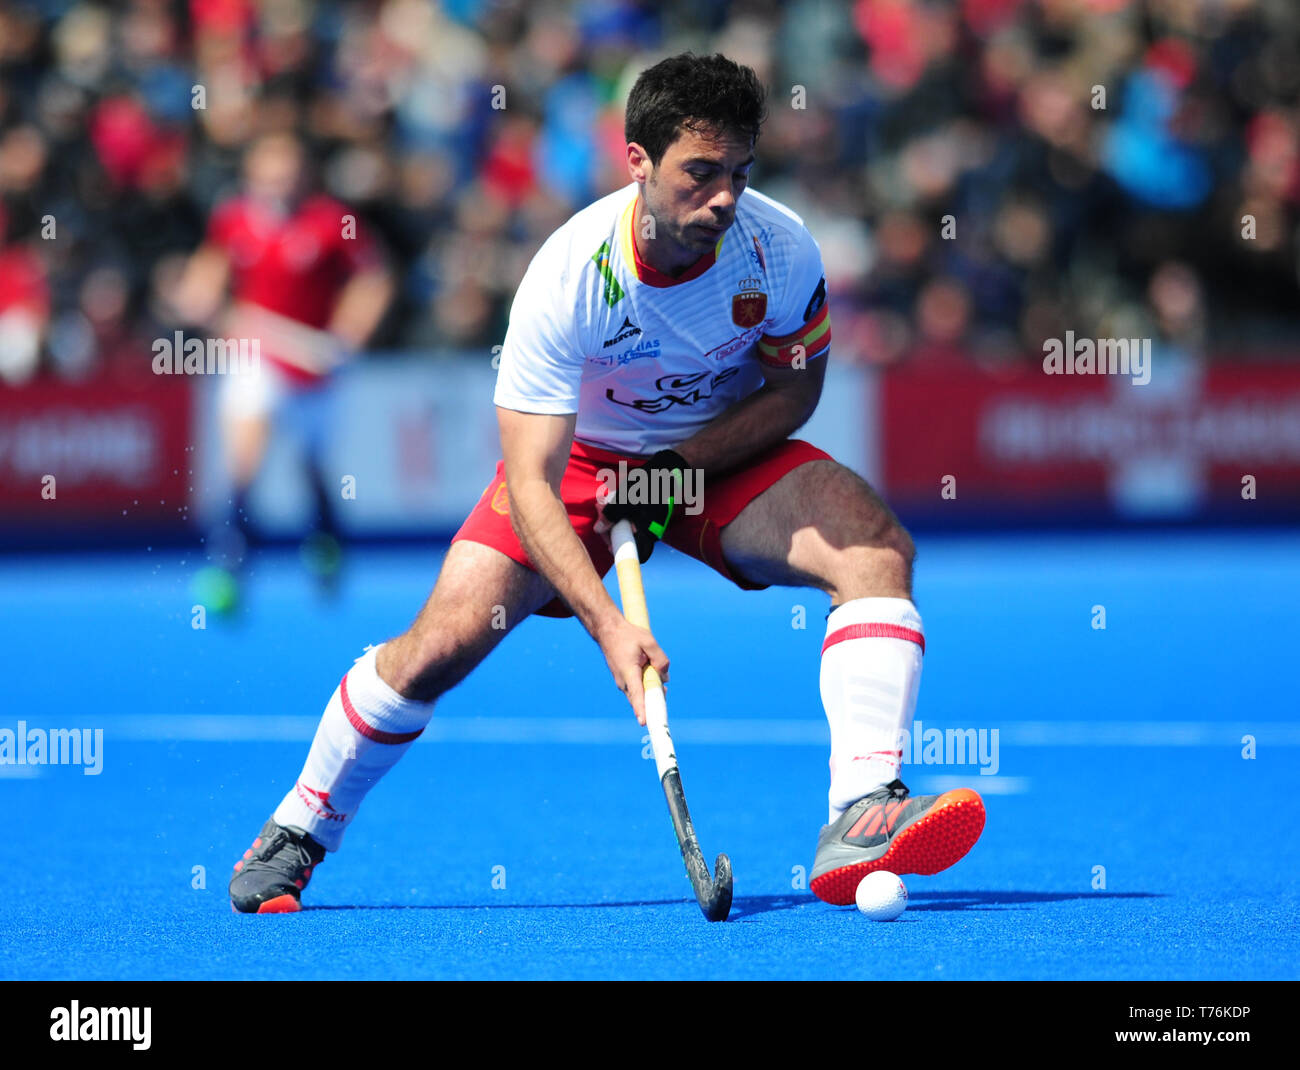 Spain's Miguel Delas during the FIH Pro League match at the Lee Valley Hockey and Tennis Centre, London. Stock Photo